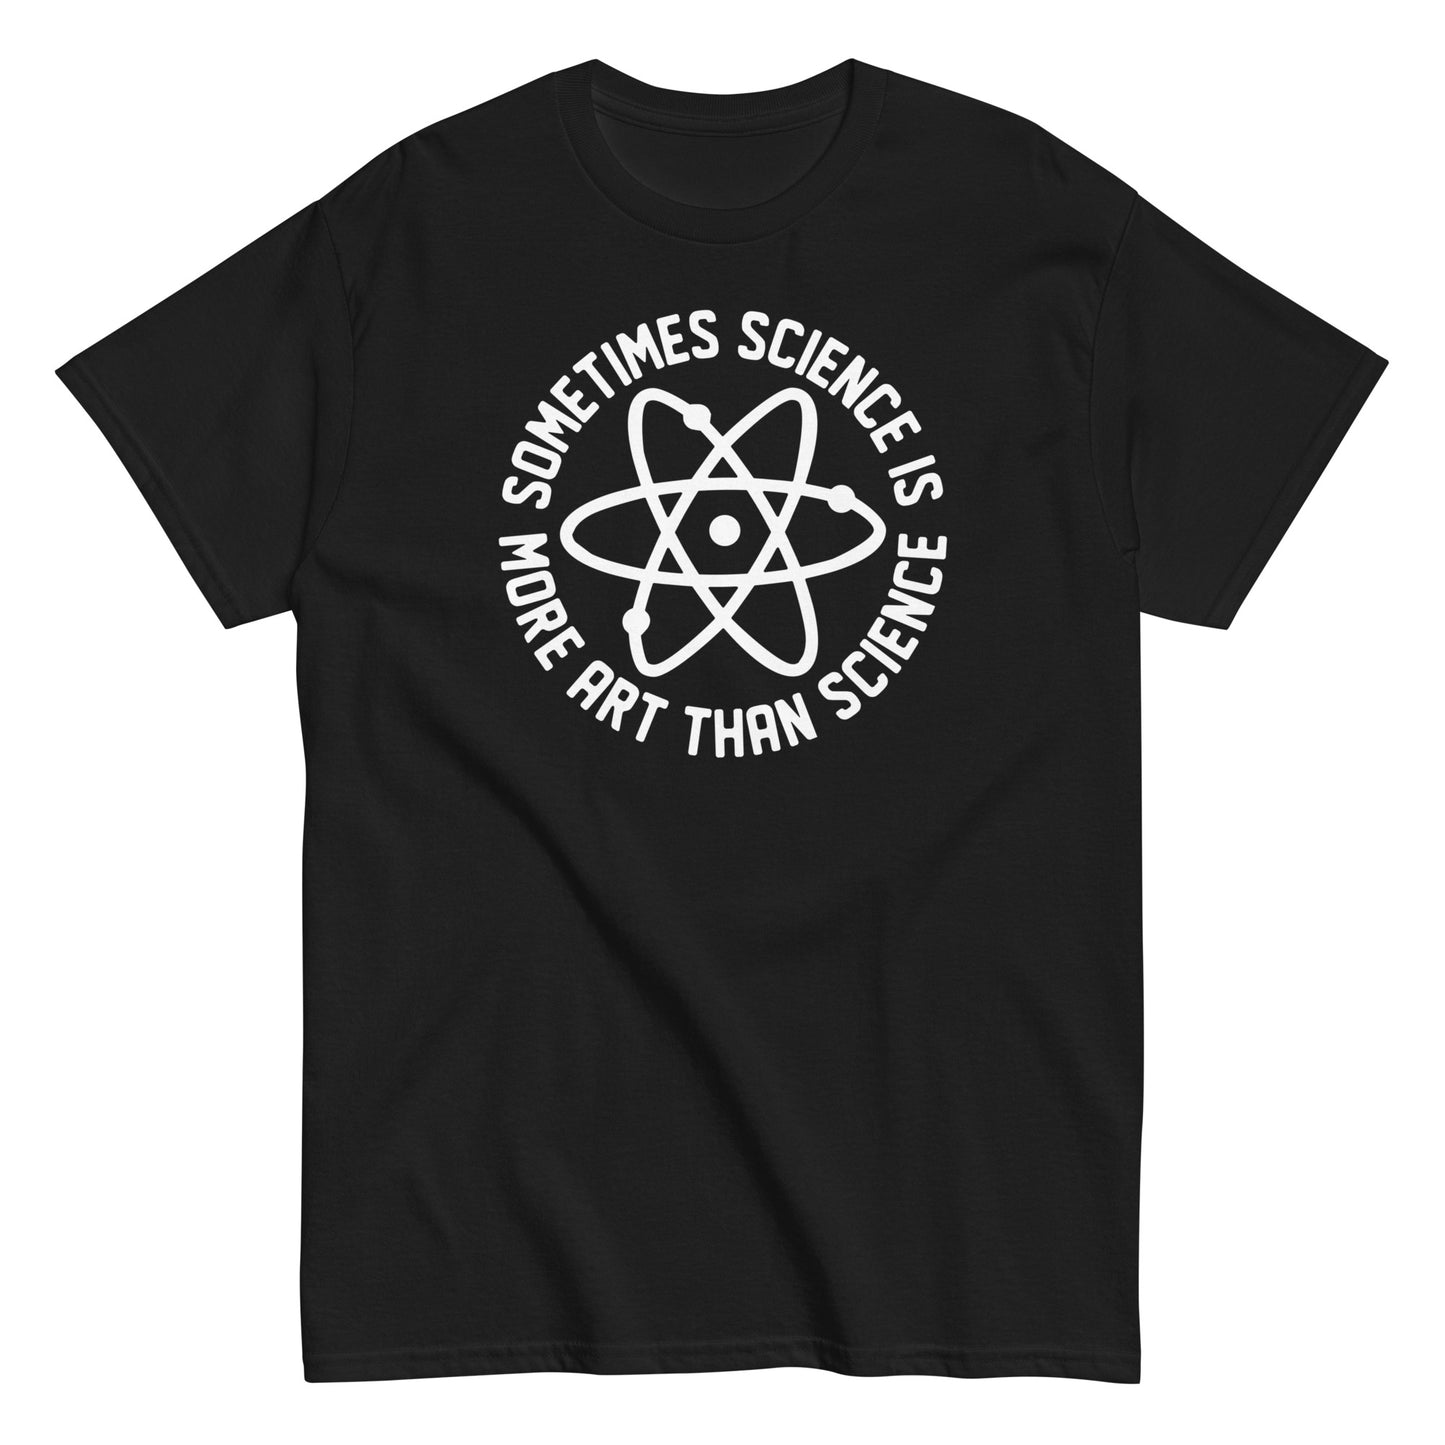 More Art Than Science Men's Classic Tee